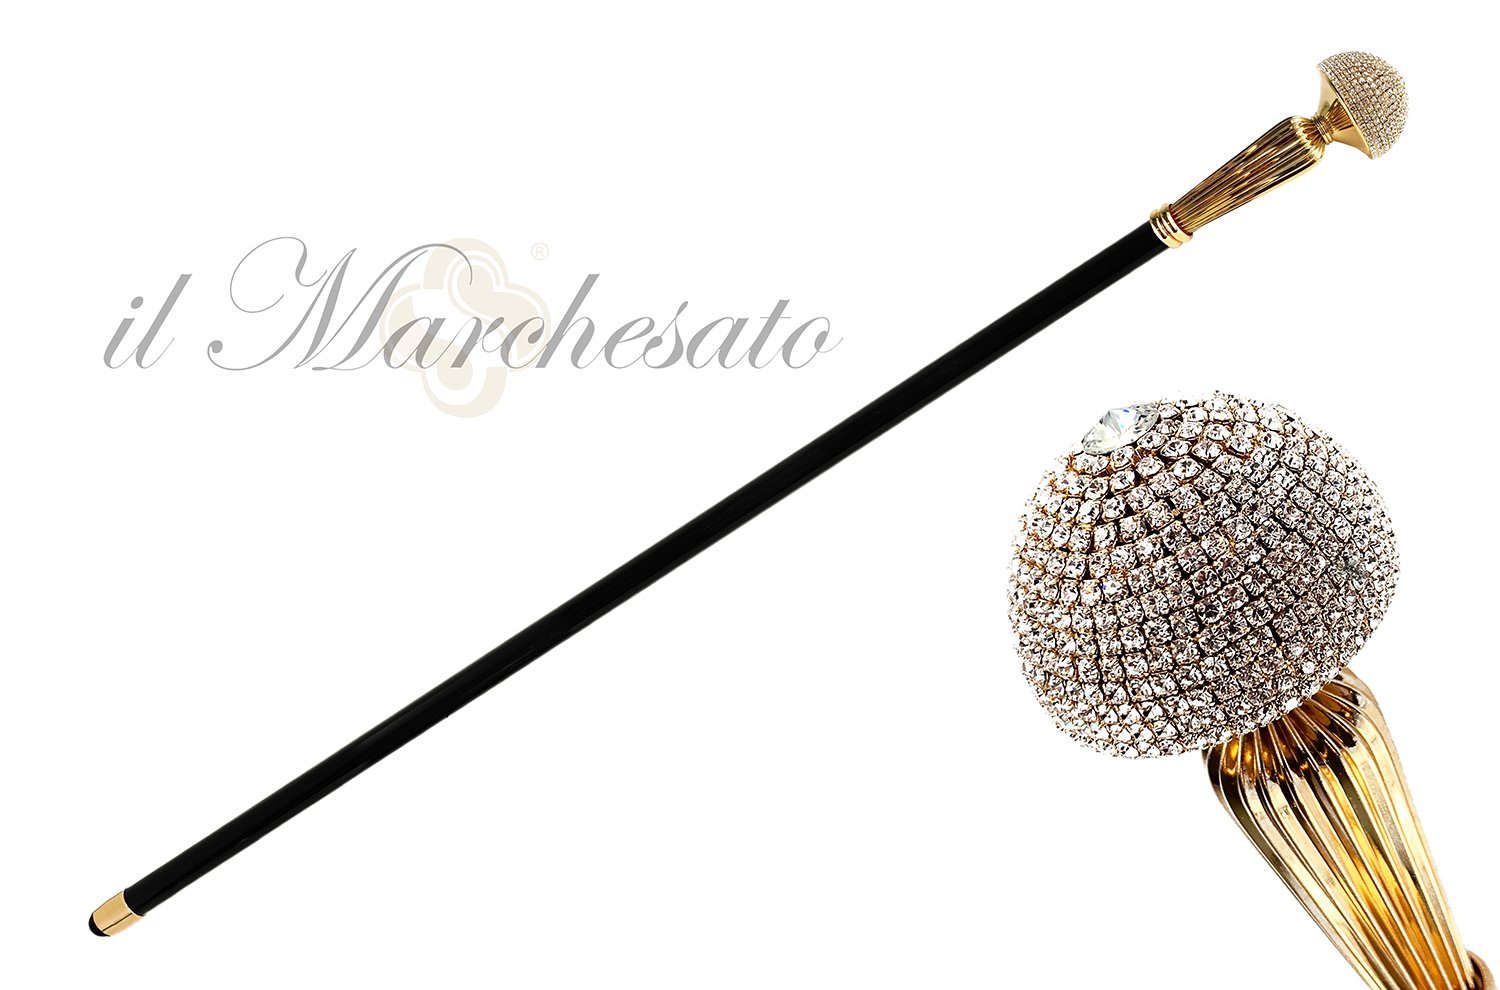 Luxurious Collectible Walking Stick - IL MARCHESATO LUXURY UMBRELLAS, CANES AND SHOEHORNS